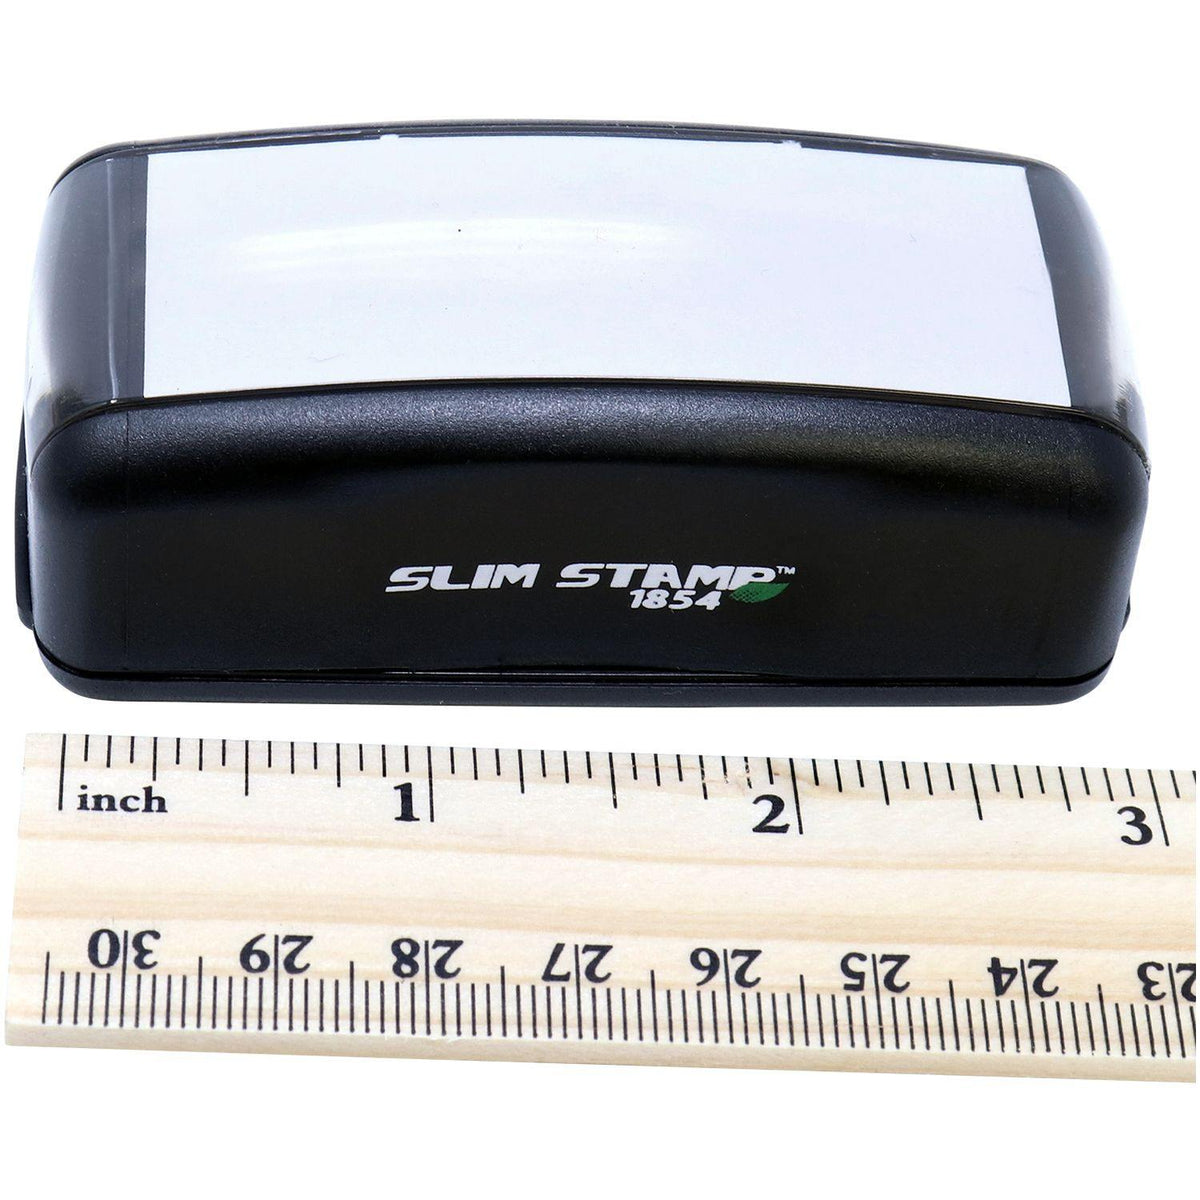 Measurement Large Pre-Inked Social Distancing Stamp with Ruler